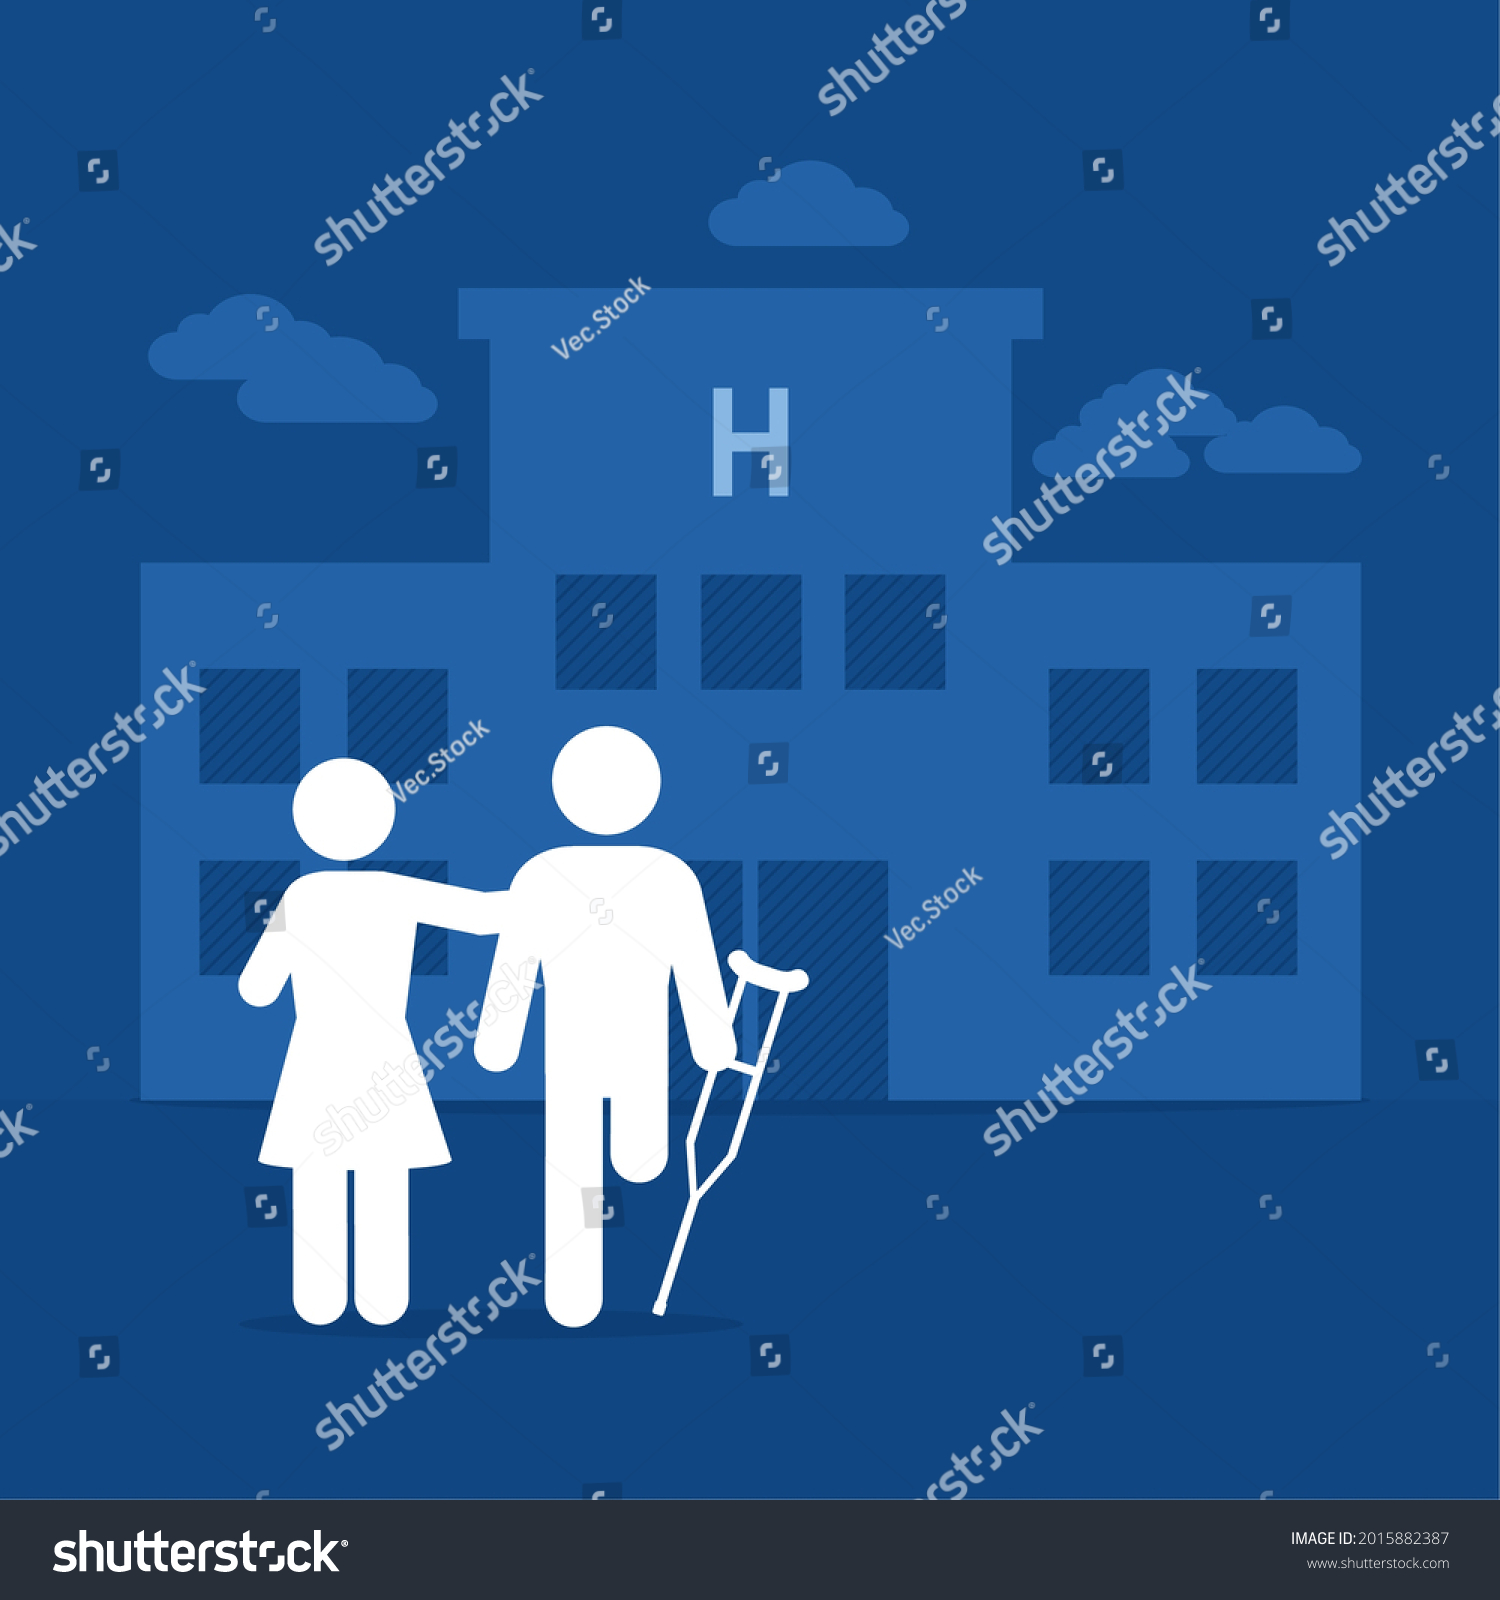 SVG of amputee man and woman over hospital building svg